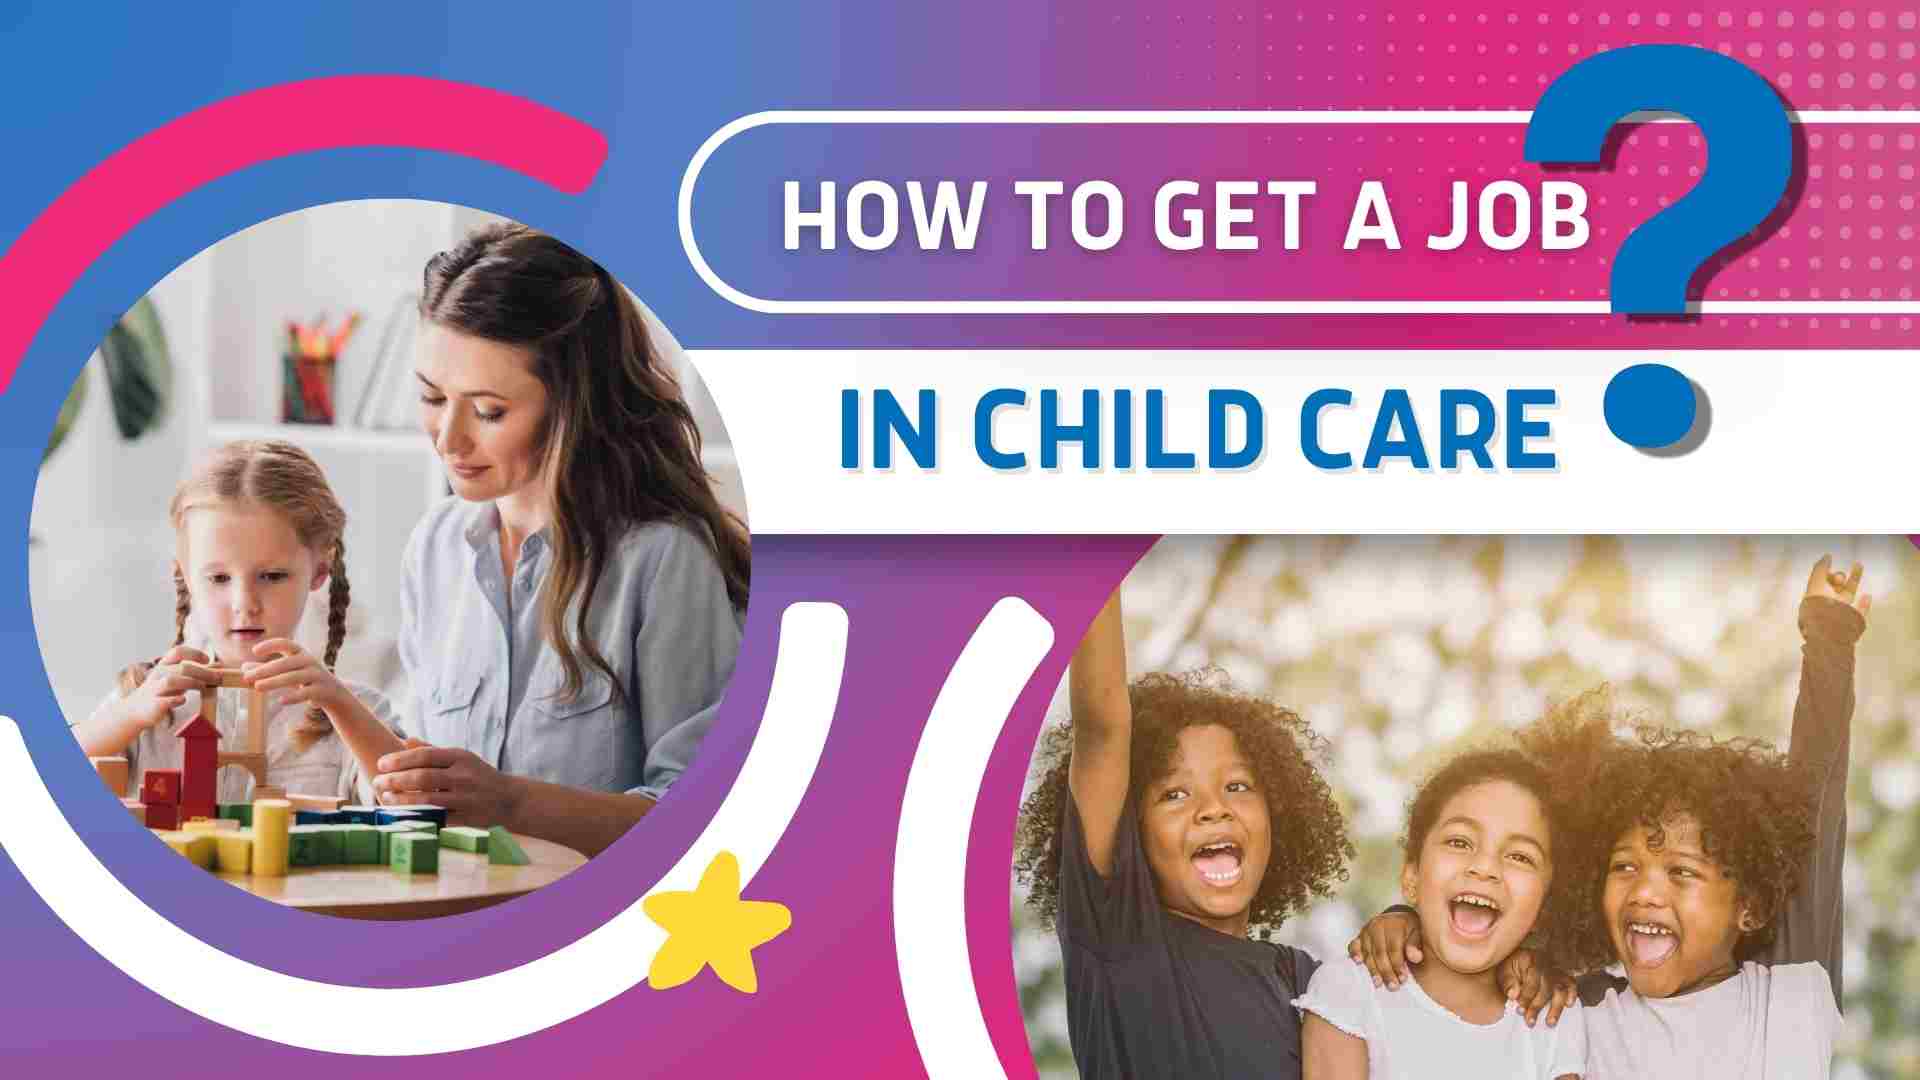 Get a job in childcare